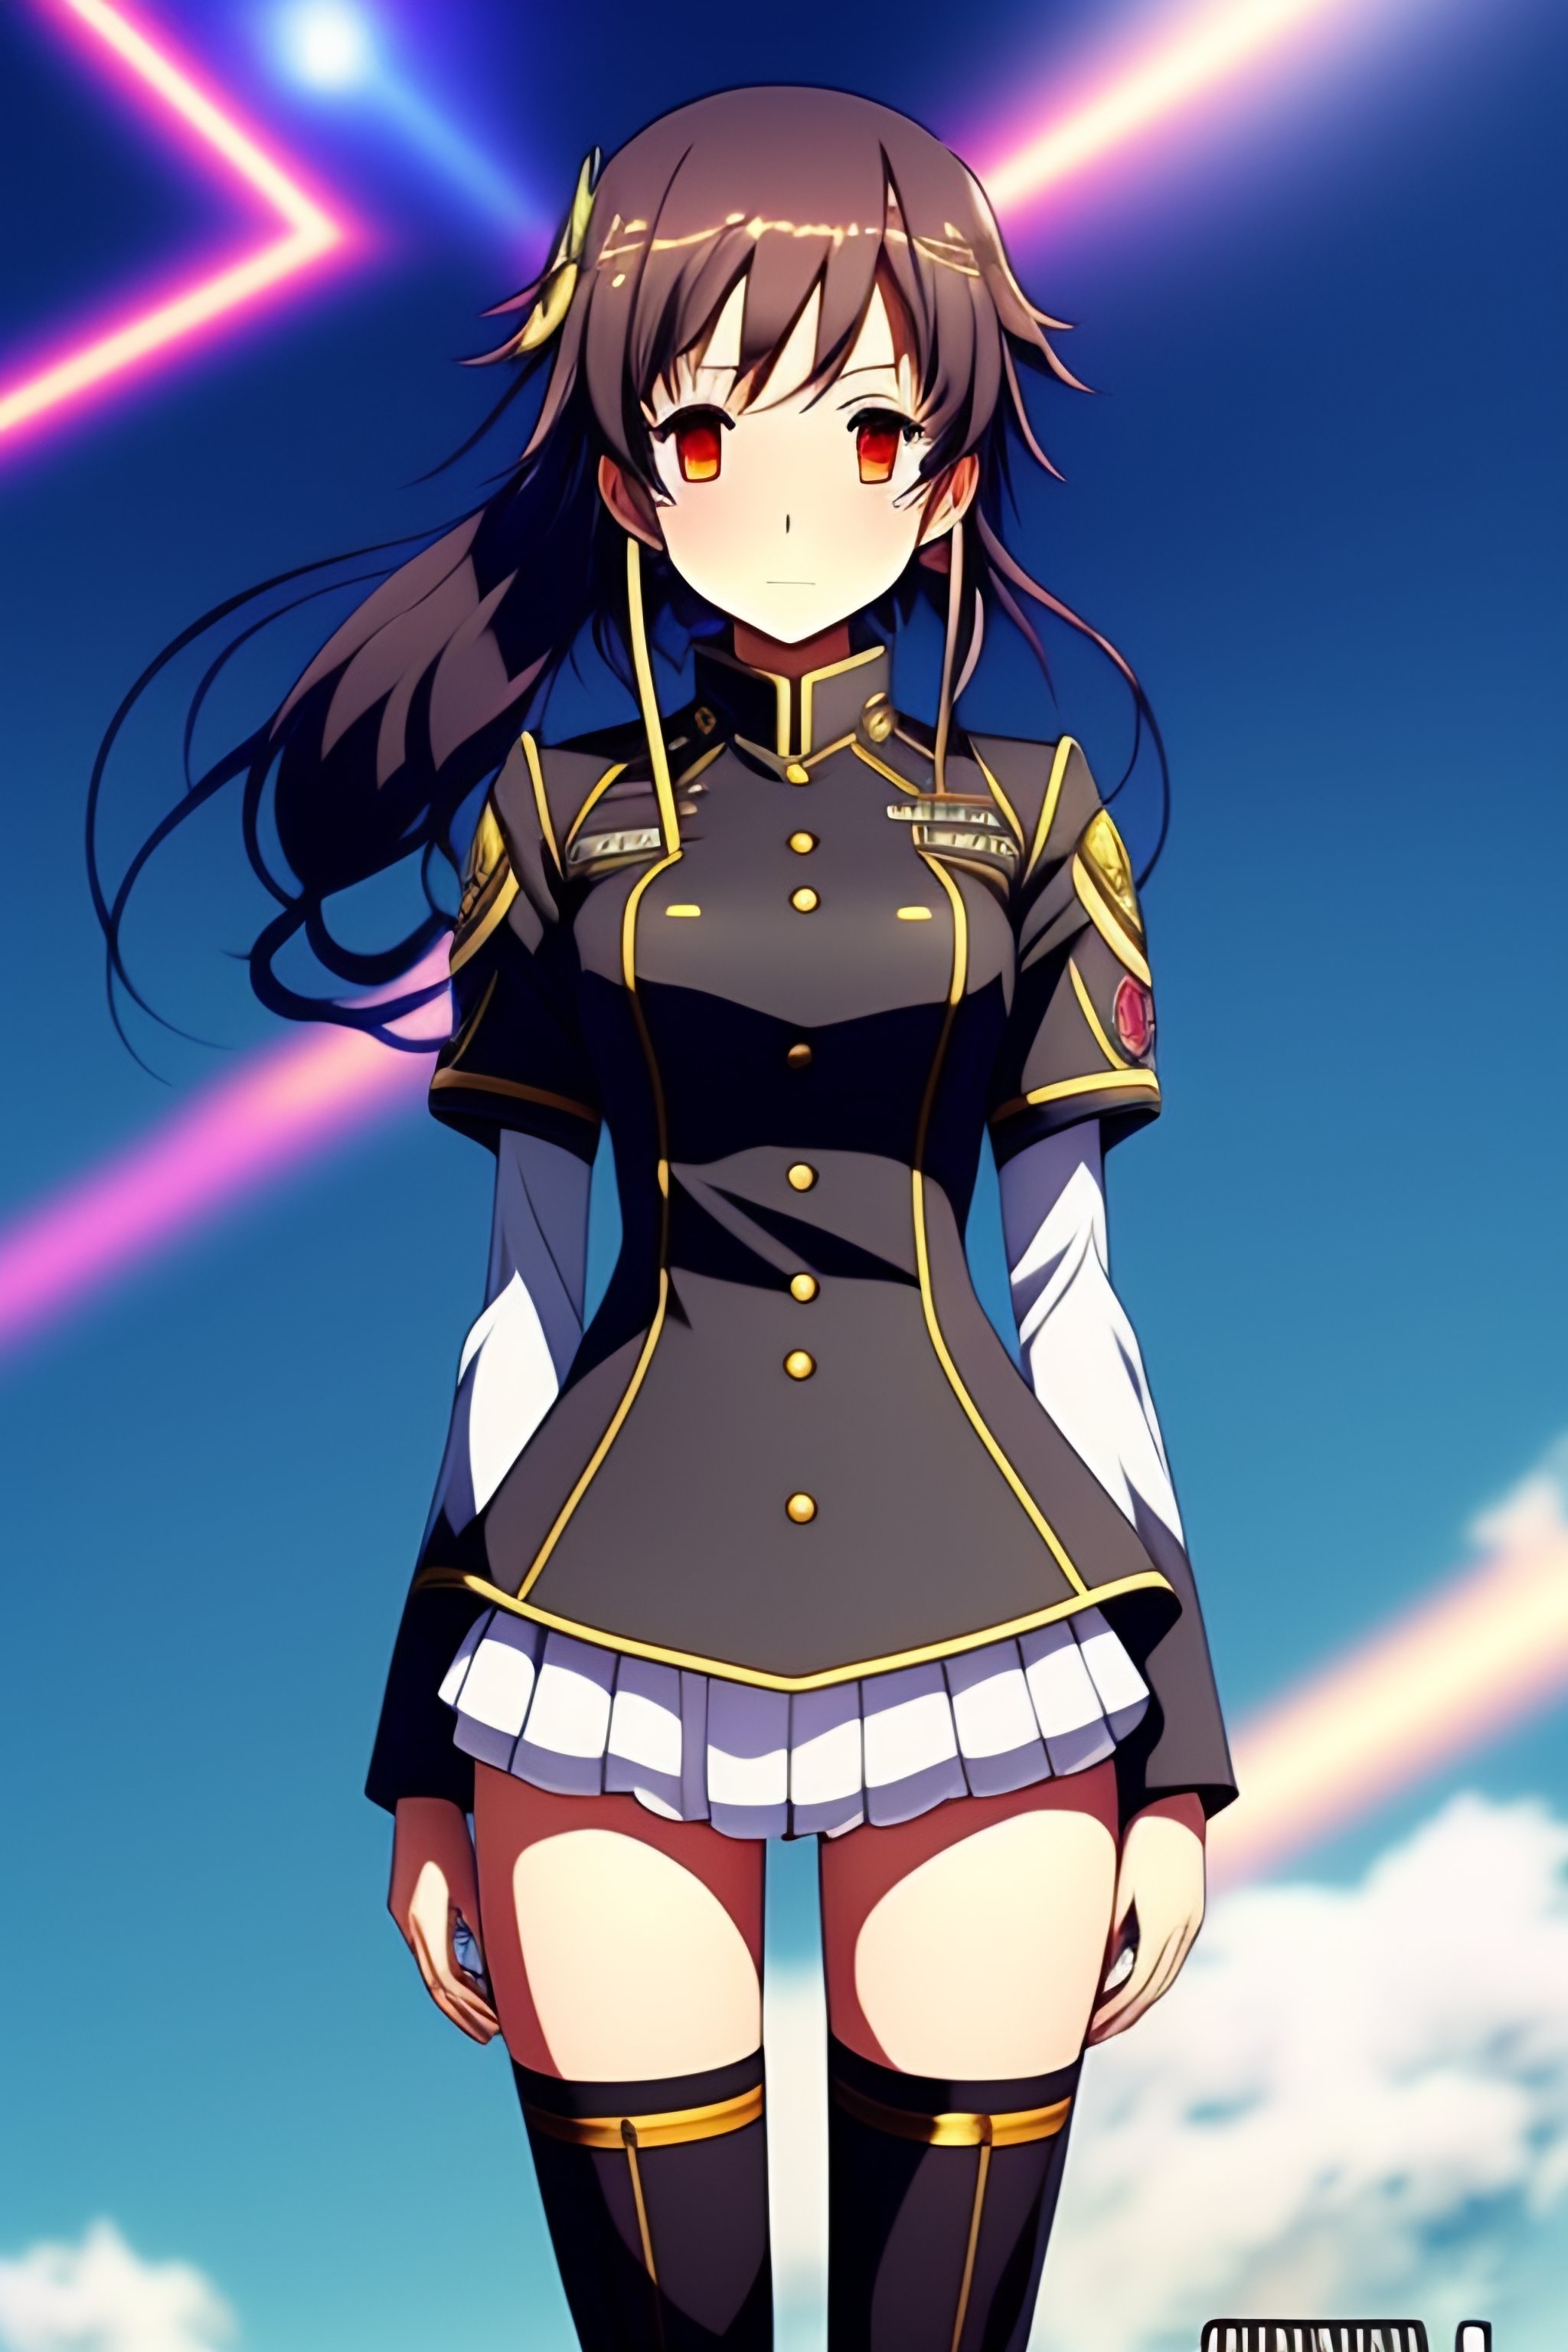 Lexica - Manga character with a uniform from Sword art online